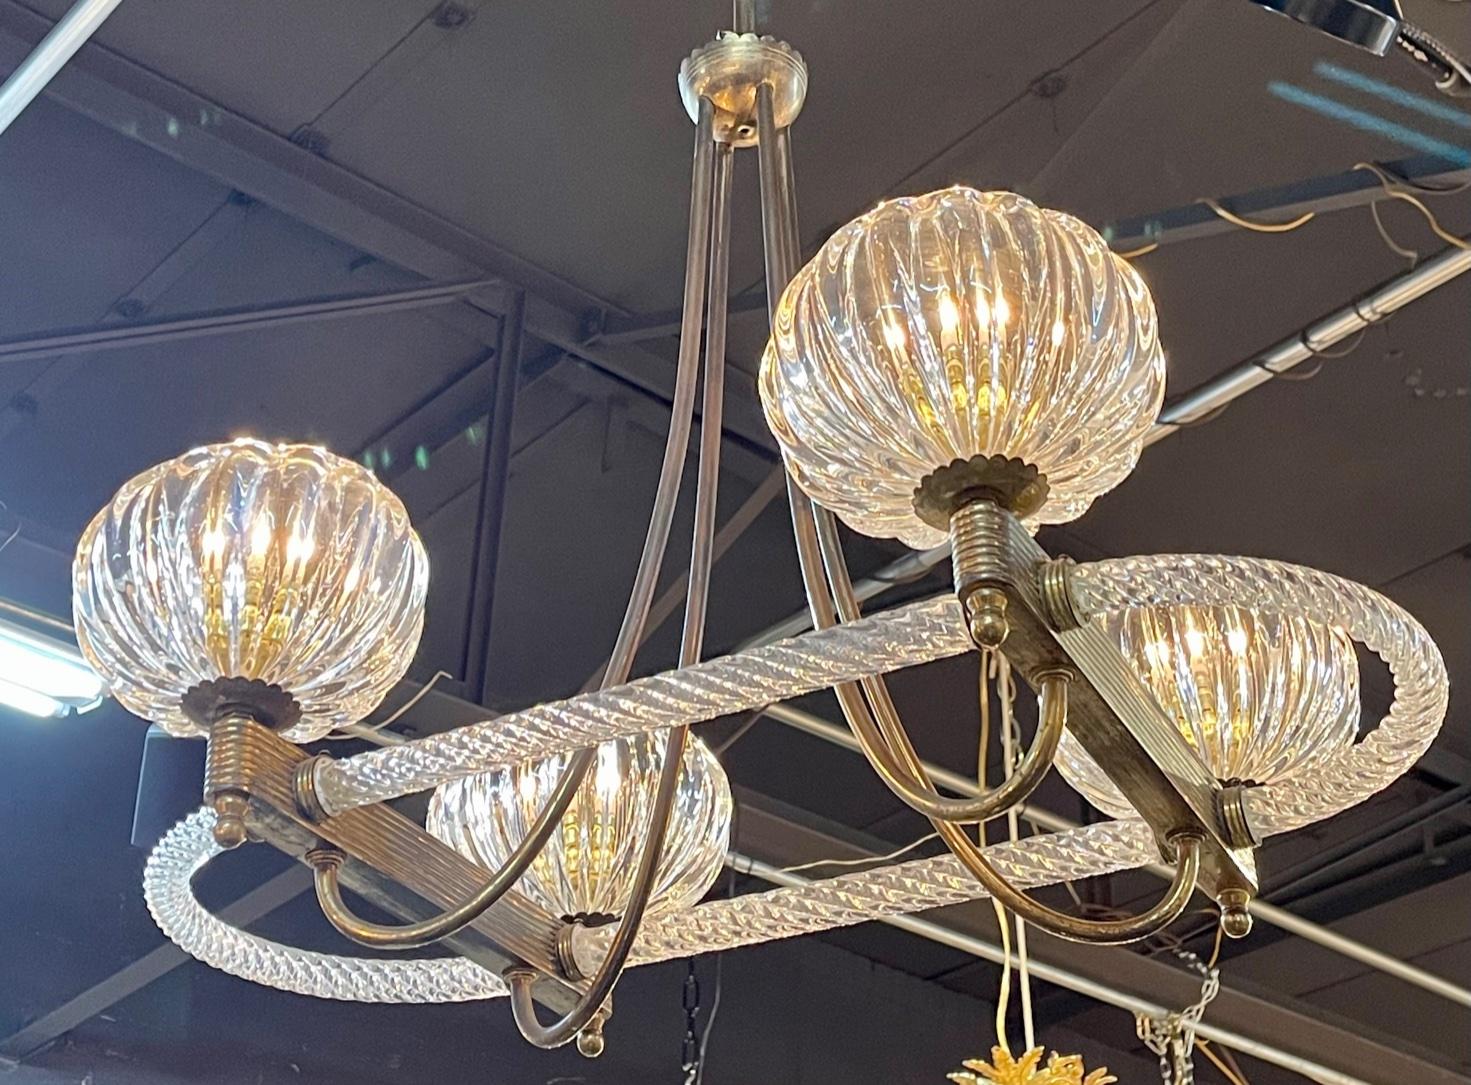 Vintage Italian Murano glass and brass 4 light chandelier after Barovier and Tose. Circa 1960. The chandelier has been professionally re-wired, cleaned and is ready to hang. Includes matching chain and canopy.